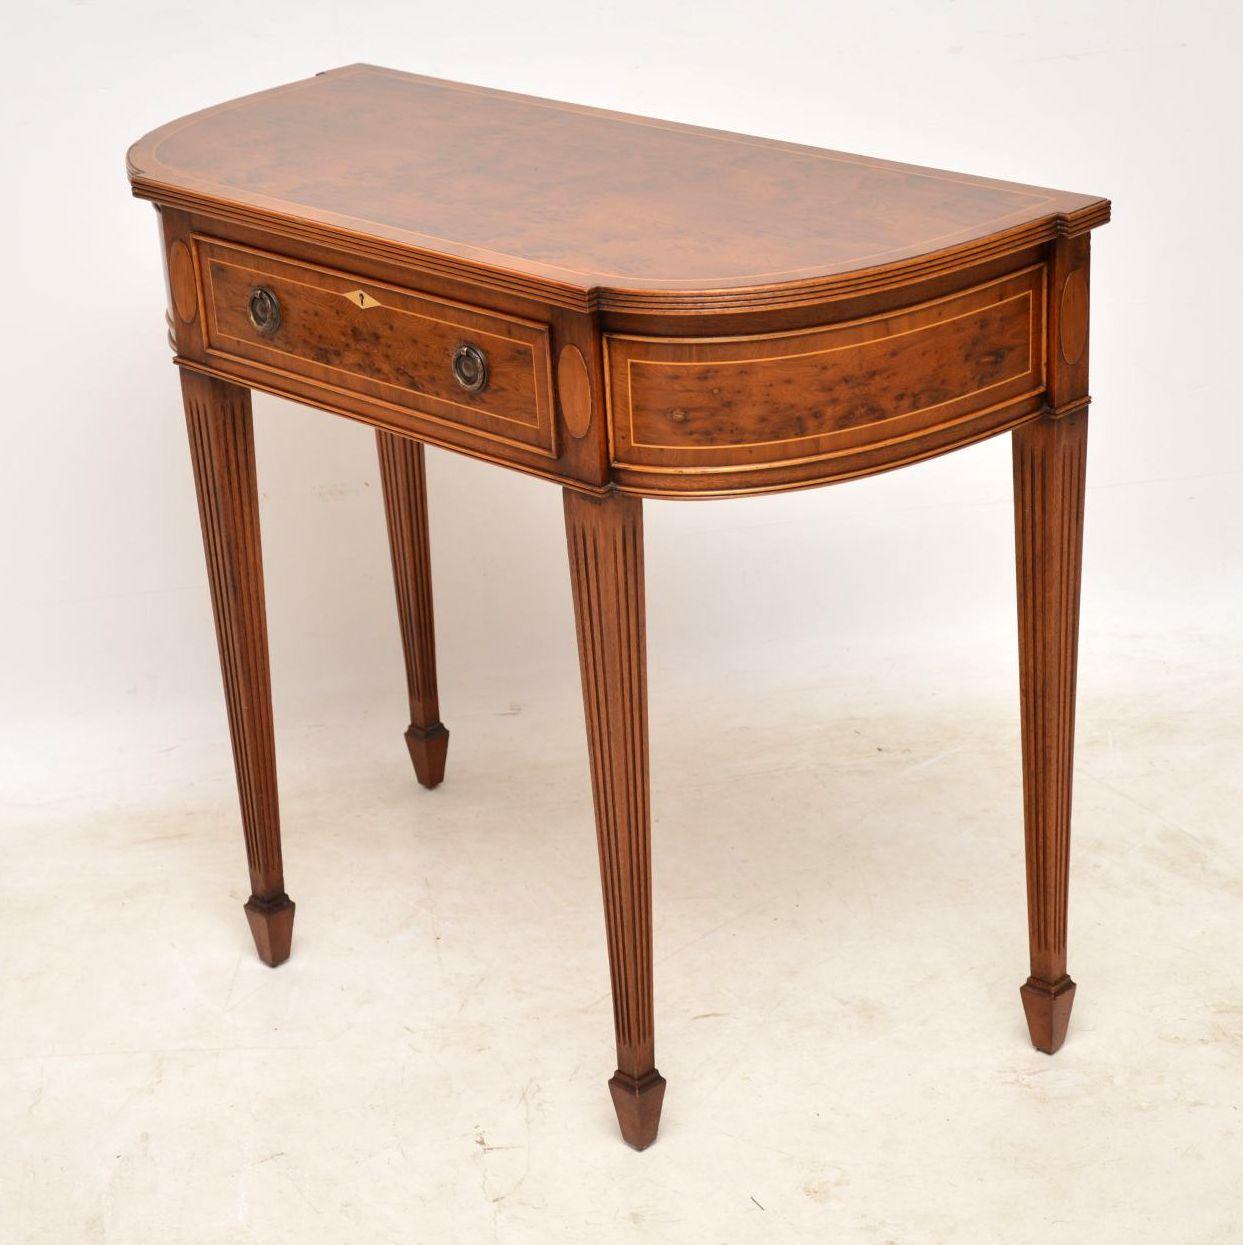 Georgian Antique Inlaid Yew Wood Console Table